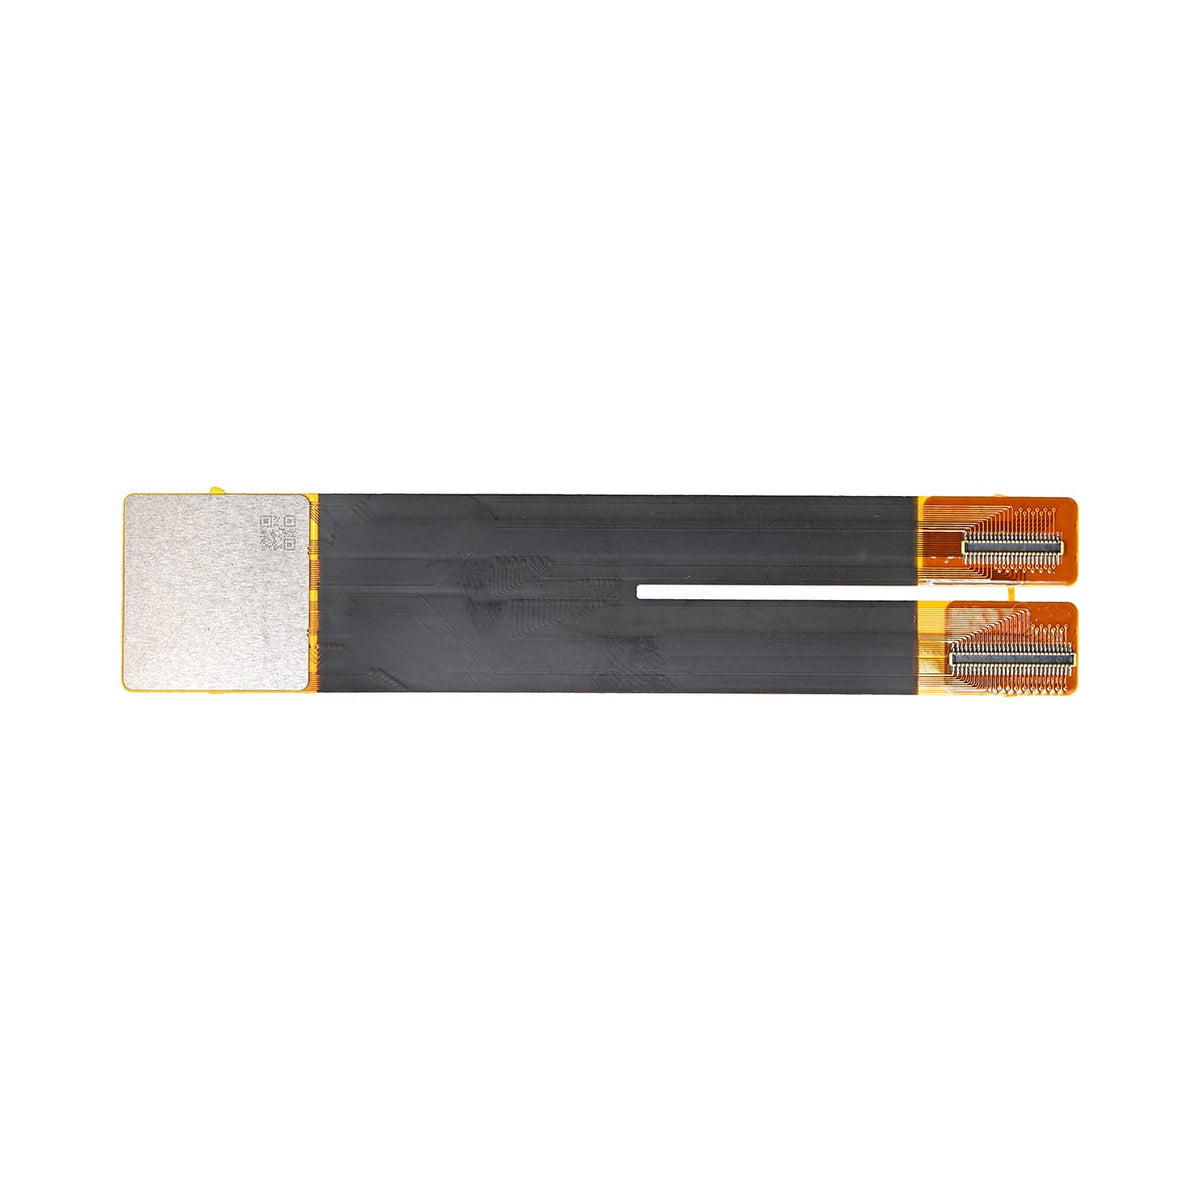 LCD SCREEN TESTING CABLE FOR IPAD 10.2-INCH 7TH